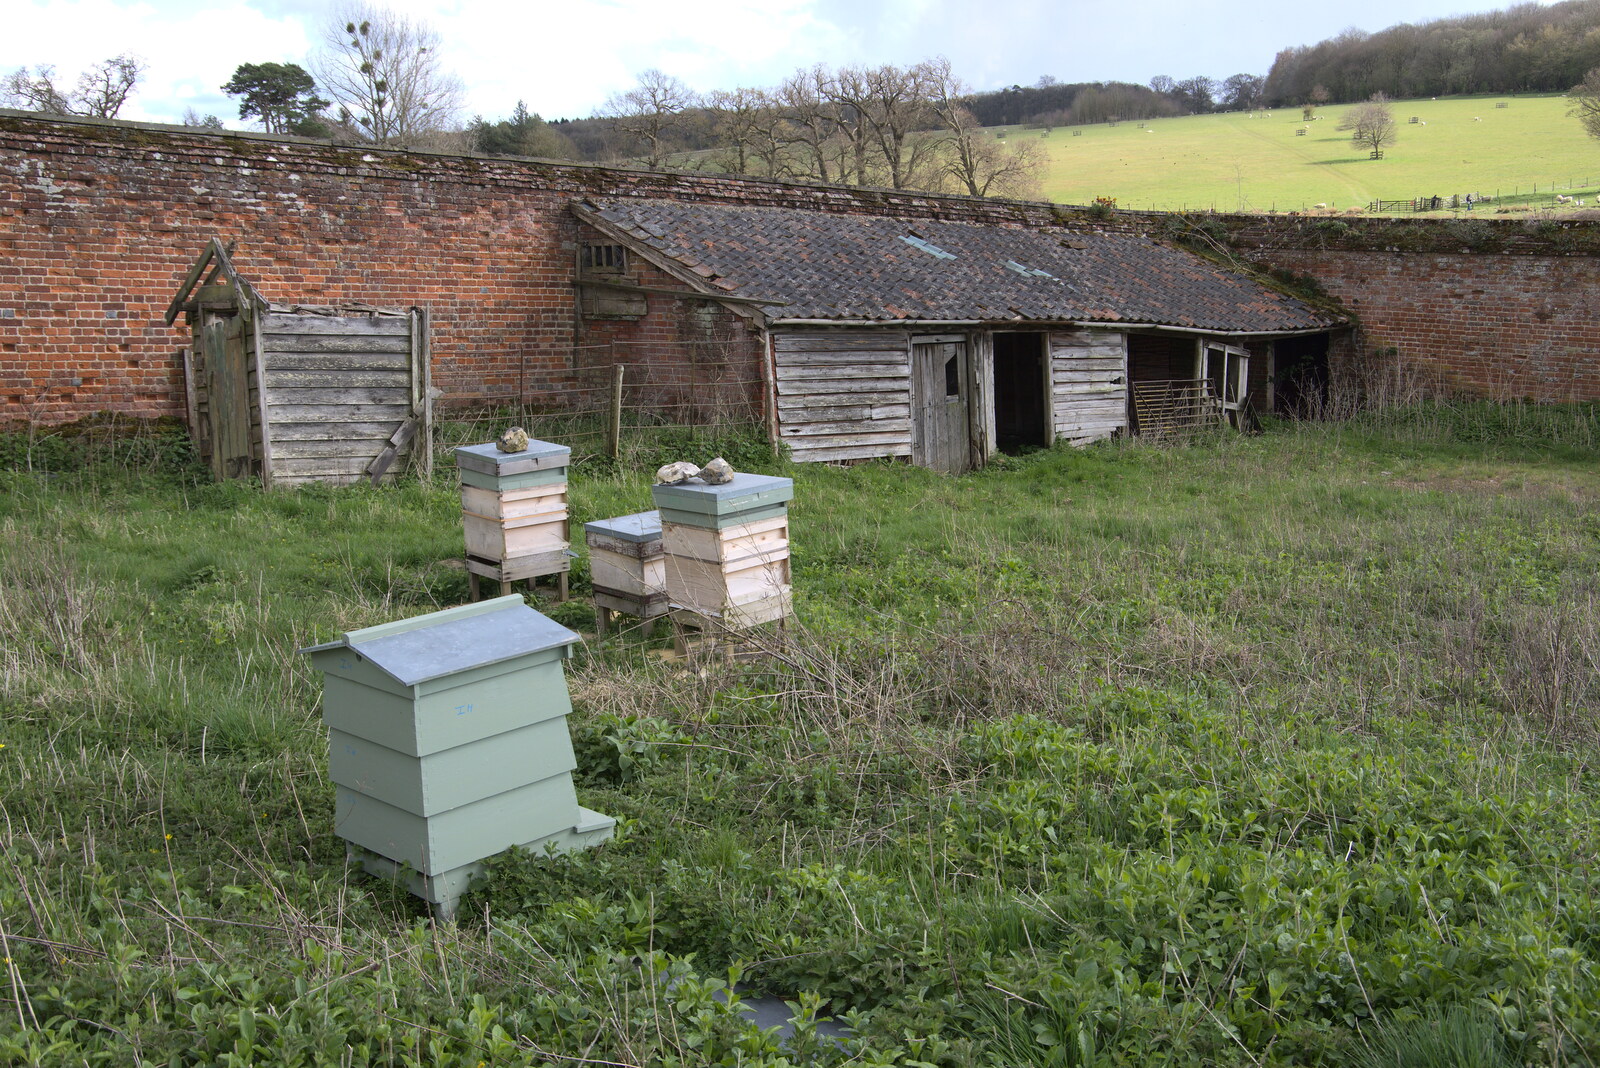 Beehives and a derelict shed from A Return to Ickworth House, Horringer, Suffolk - 11th April 2021